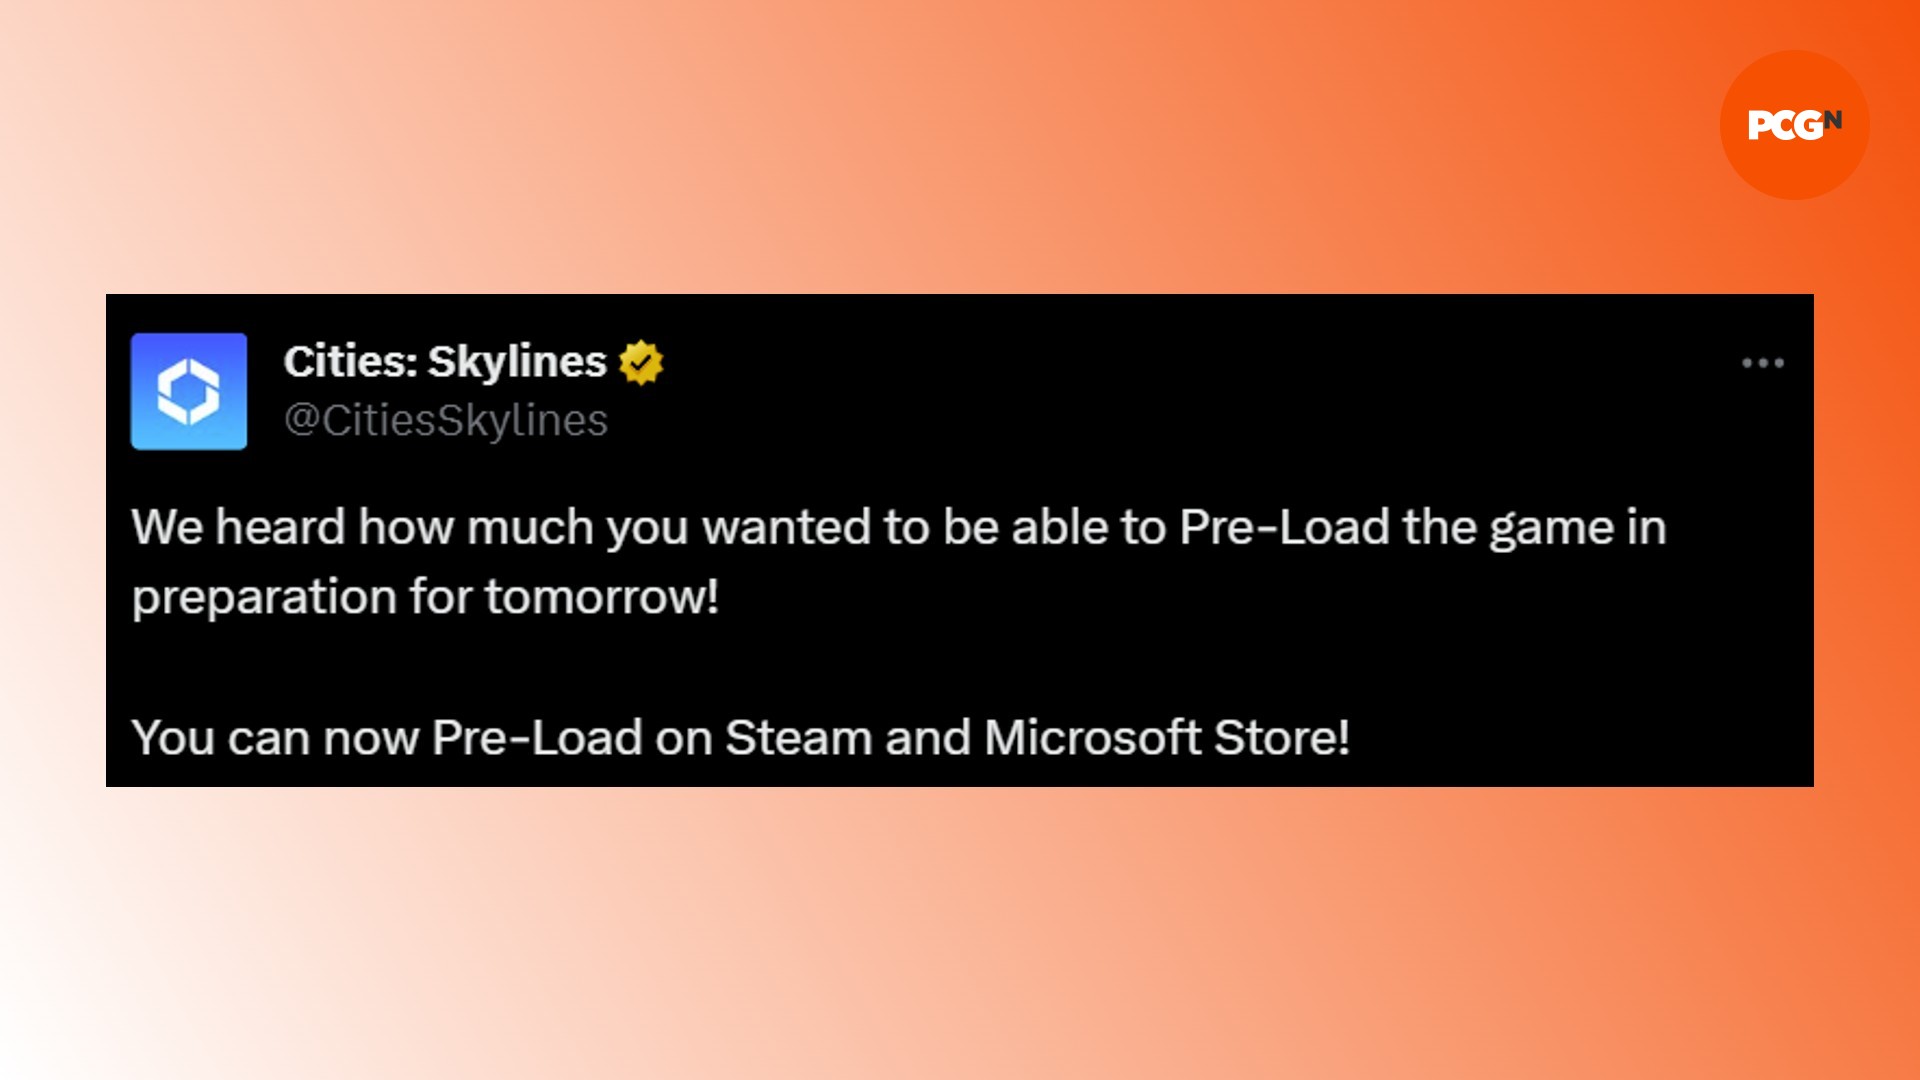 Cities Skylines 2 Steam preload: A tweet from Cities Skylines 2 creators Paradox and Colossal Order